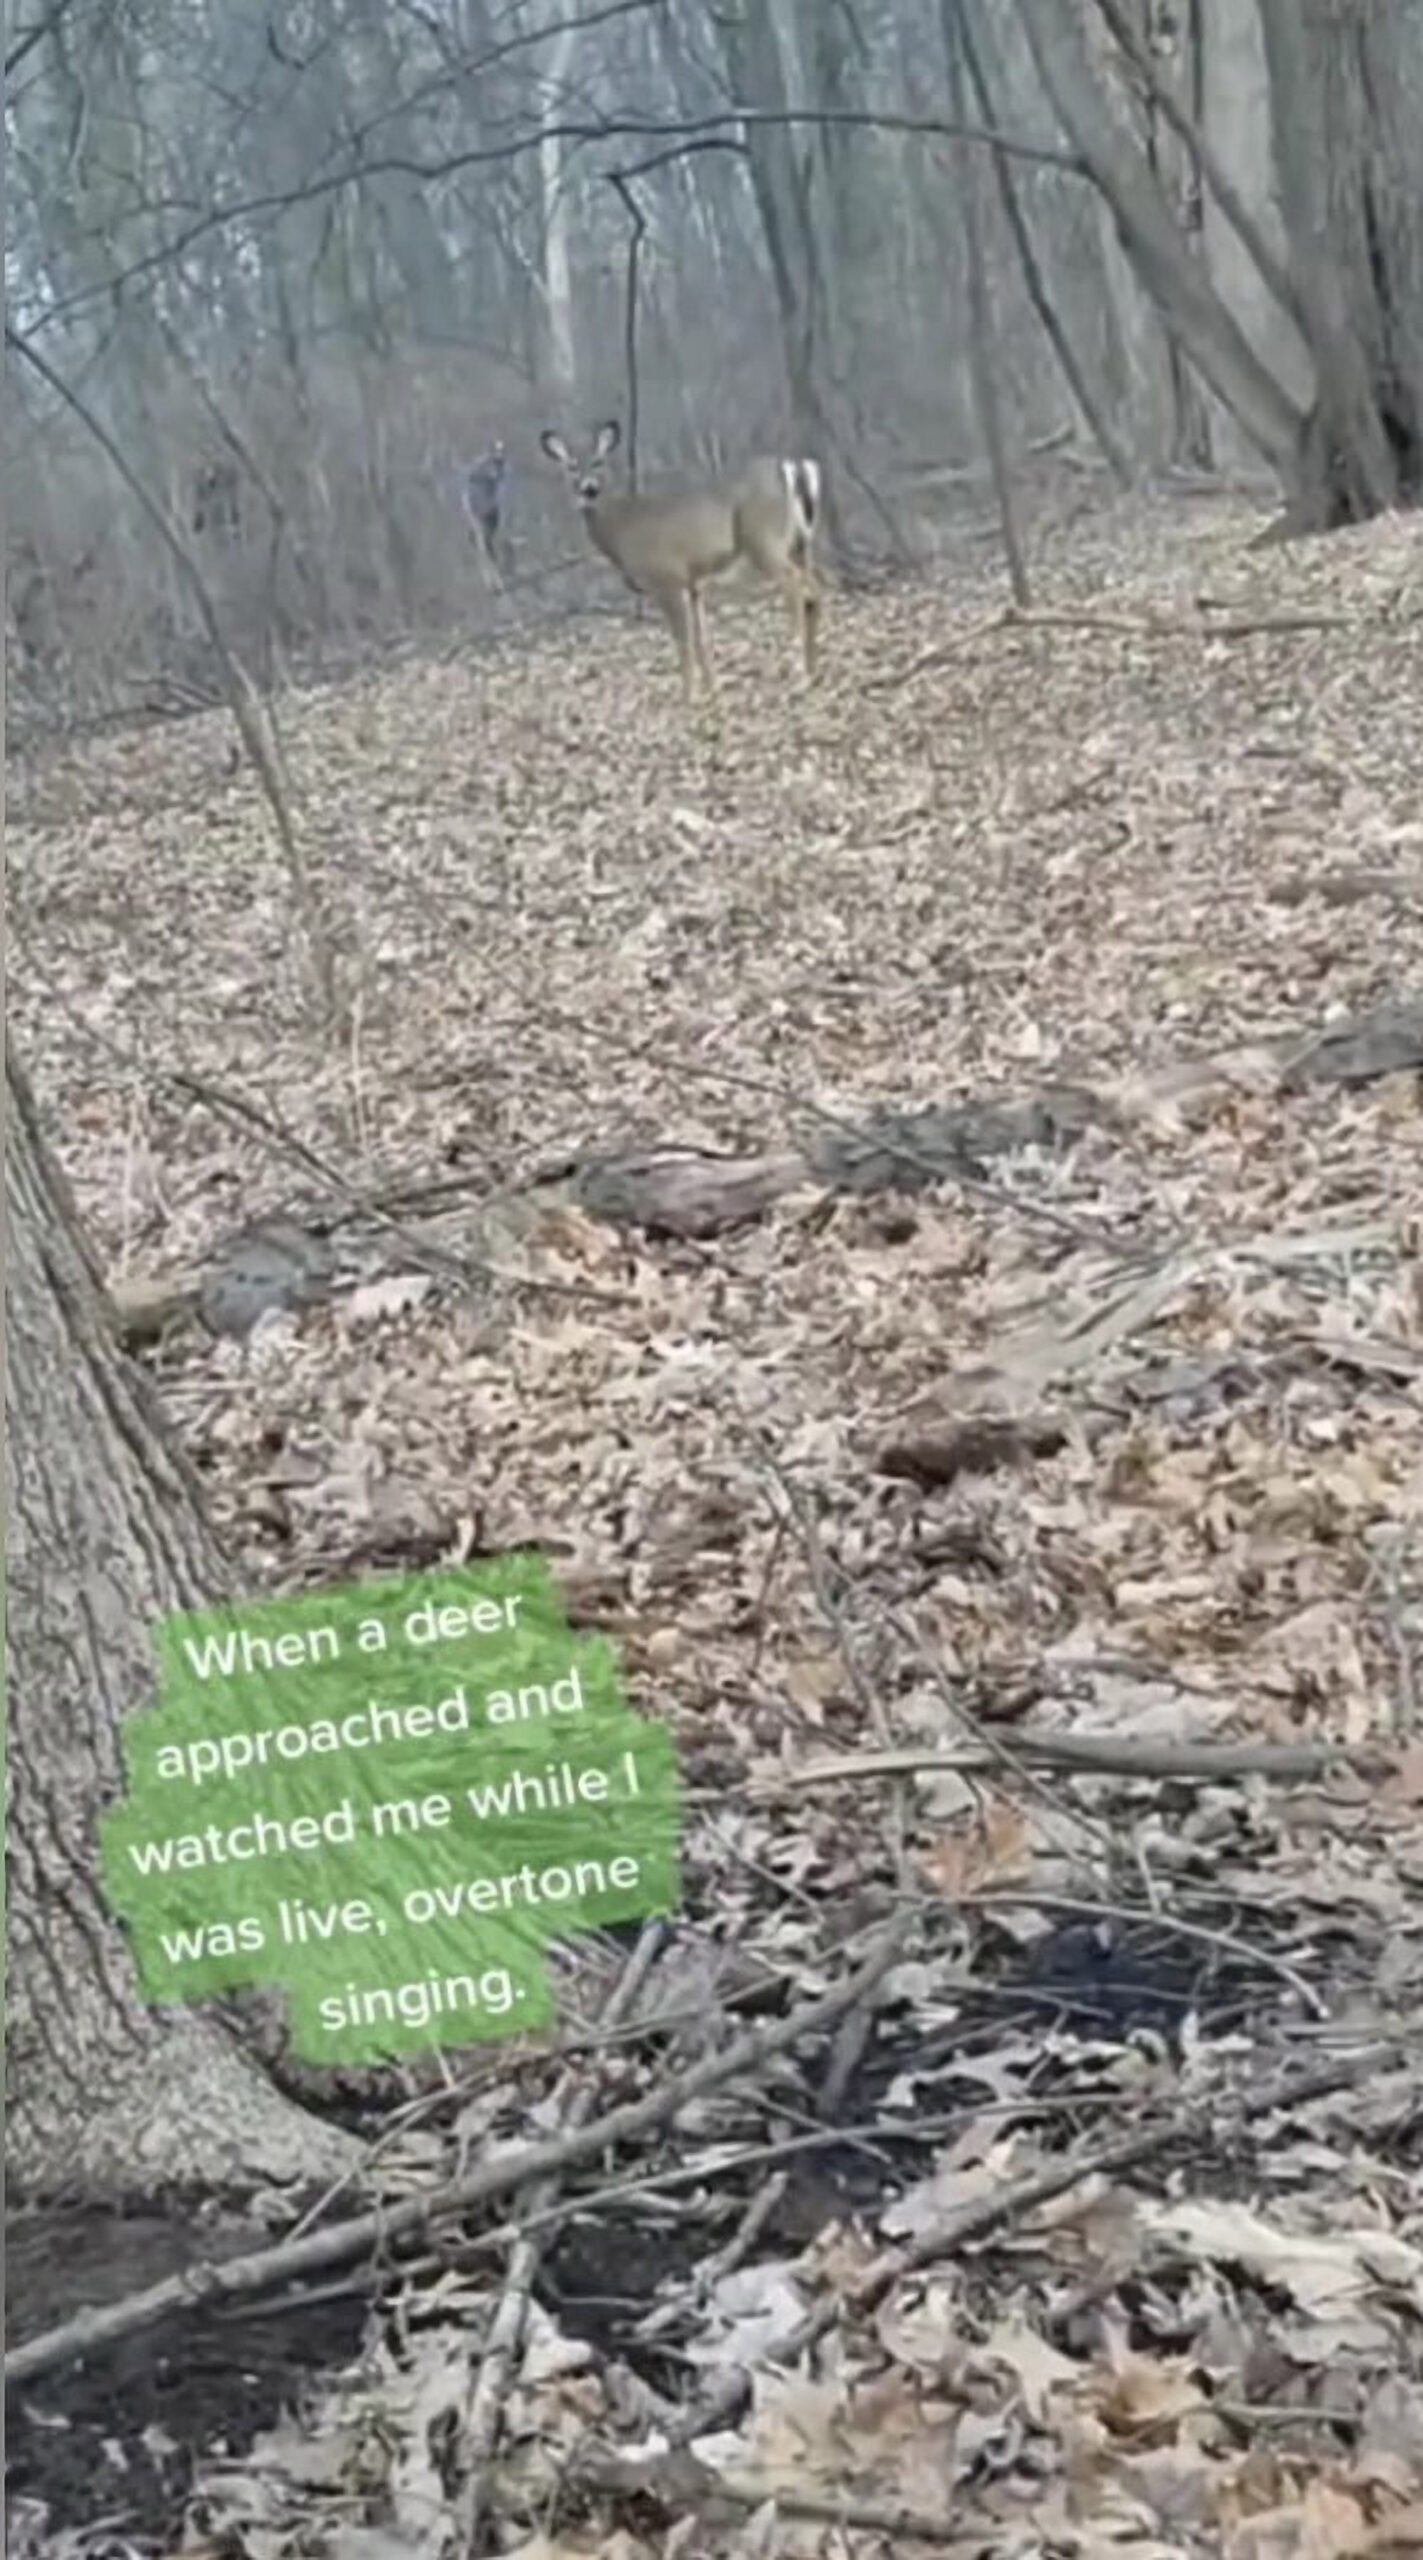 Terence MG Leano, 26, who lives in Windsor, Ontario in Canada filmed two unidentified creatures and a deer which appeared in the background while he was singing. (@throatsingking/Zenger)